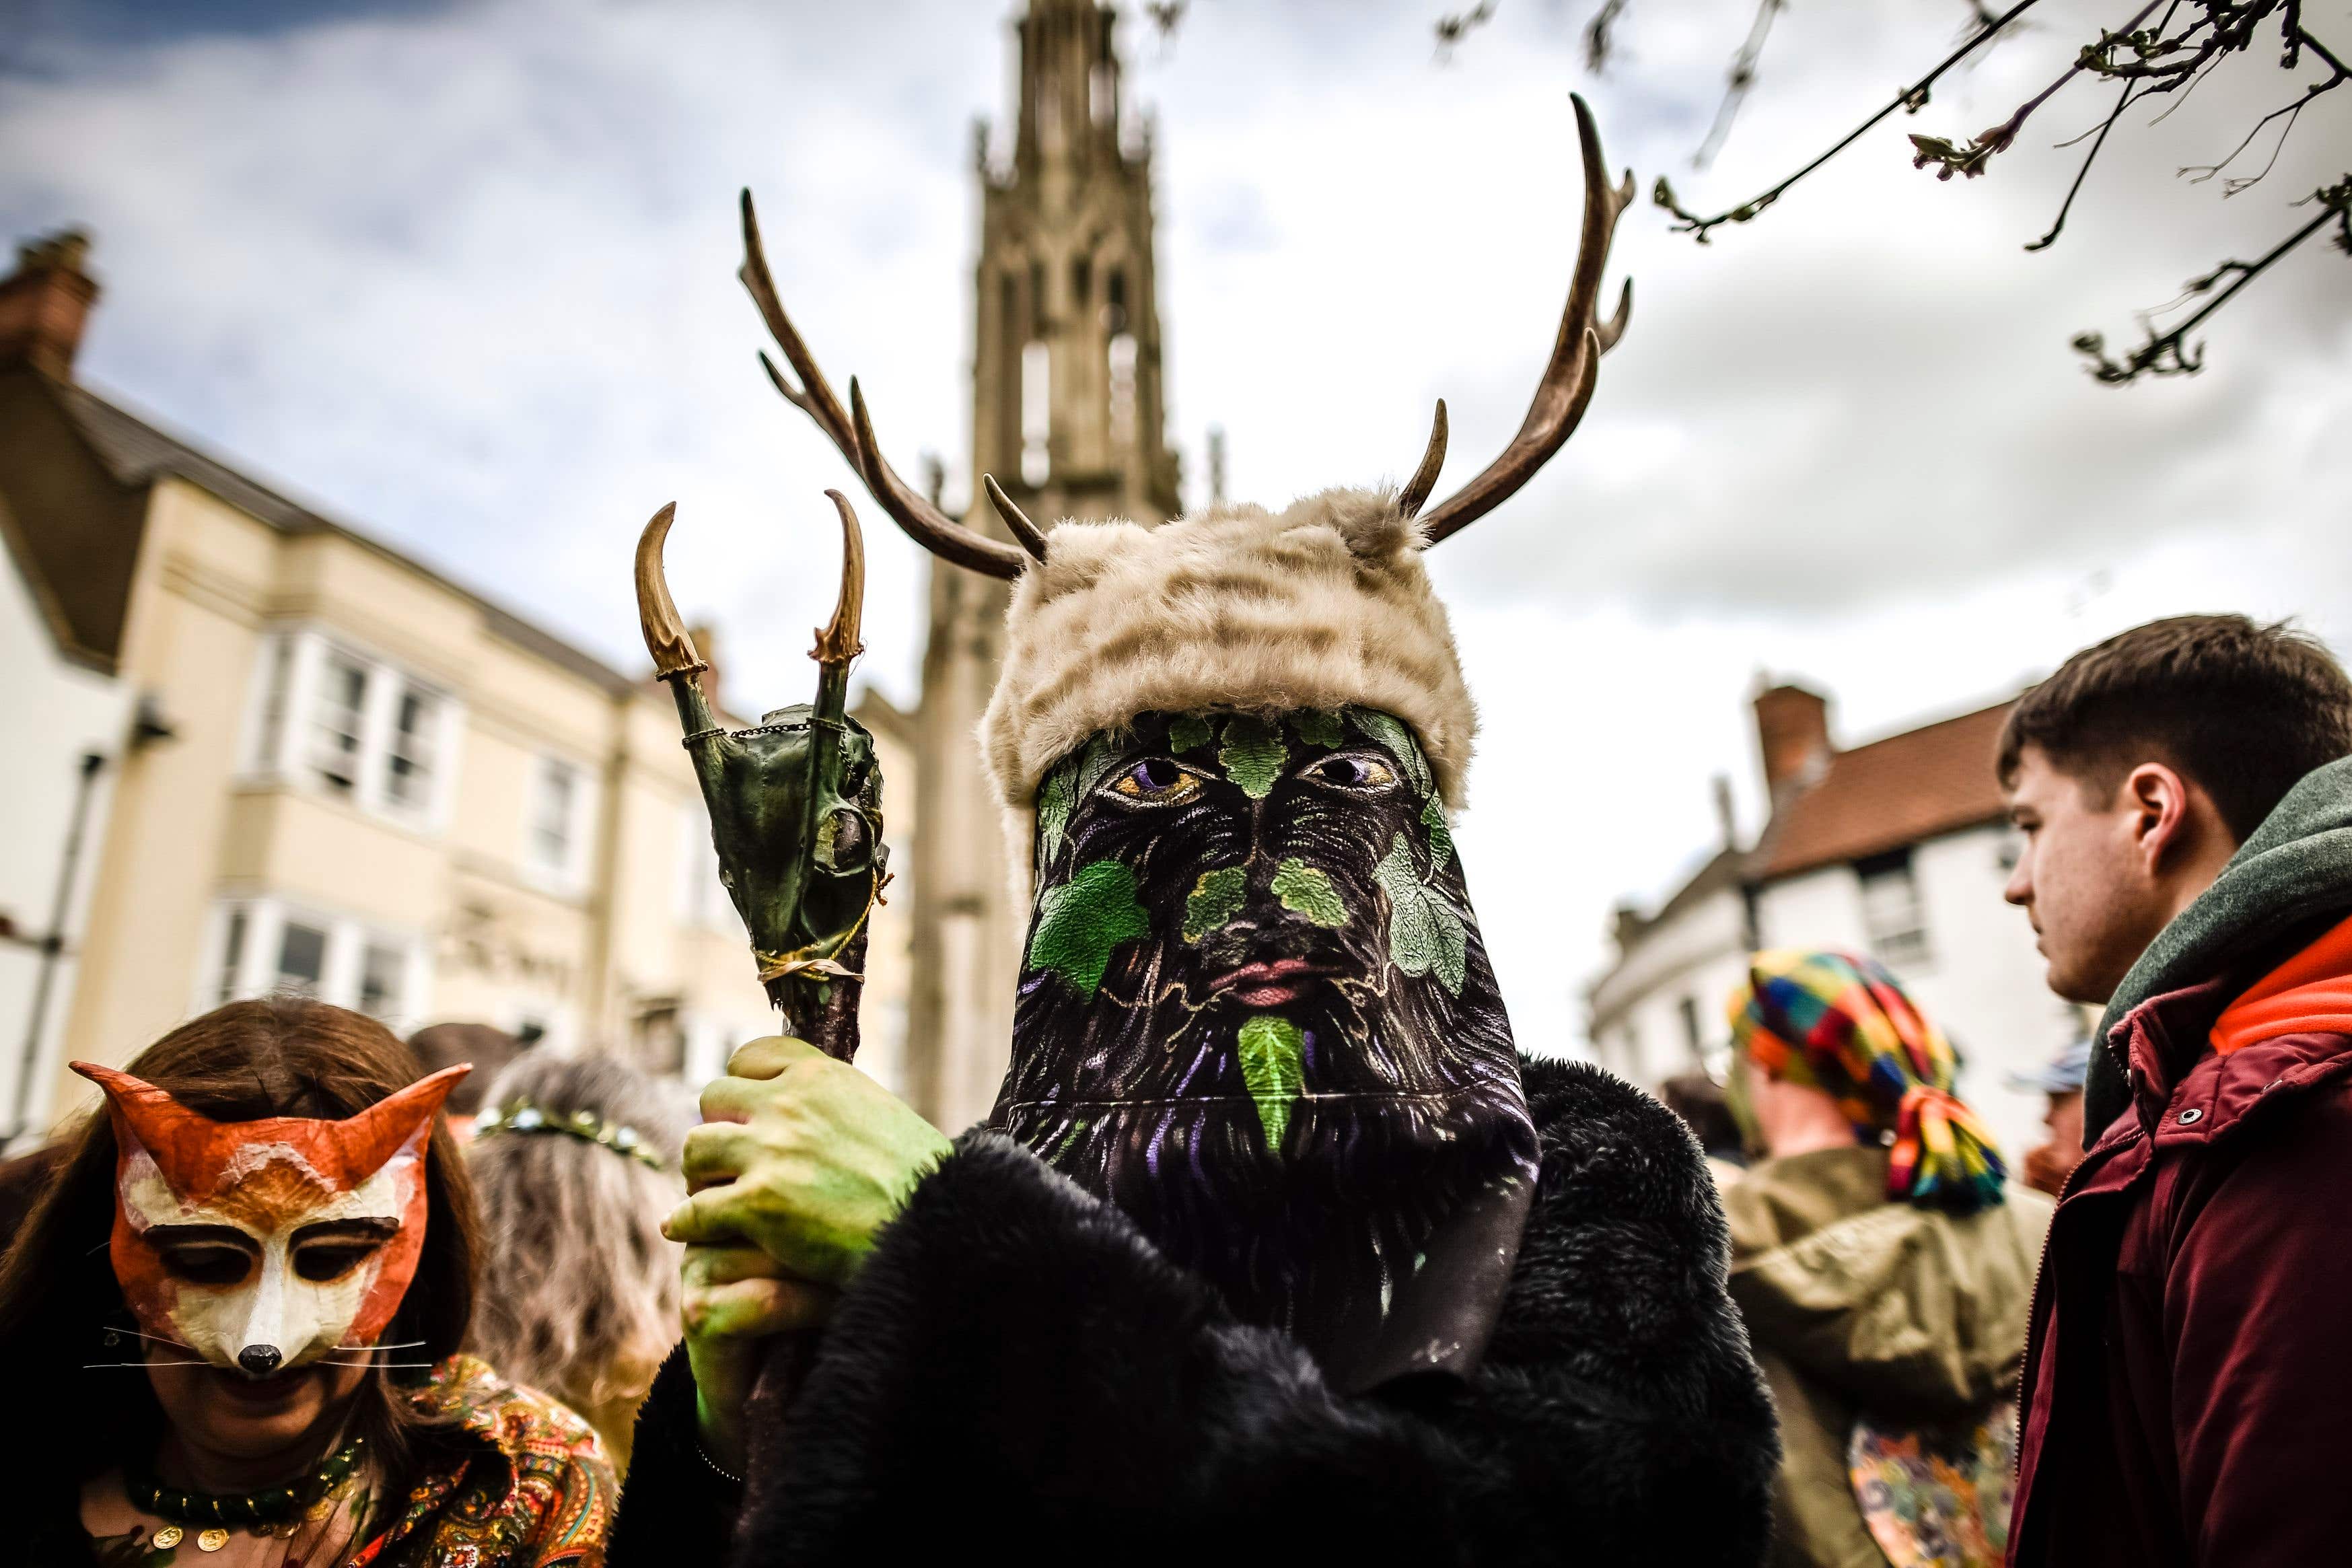 A man is dressed as a Green Man during the Glastonbury Beltane celebrations in Somerset (Ben Birchall/PA)